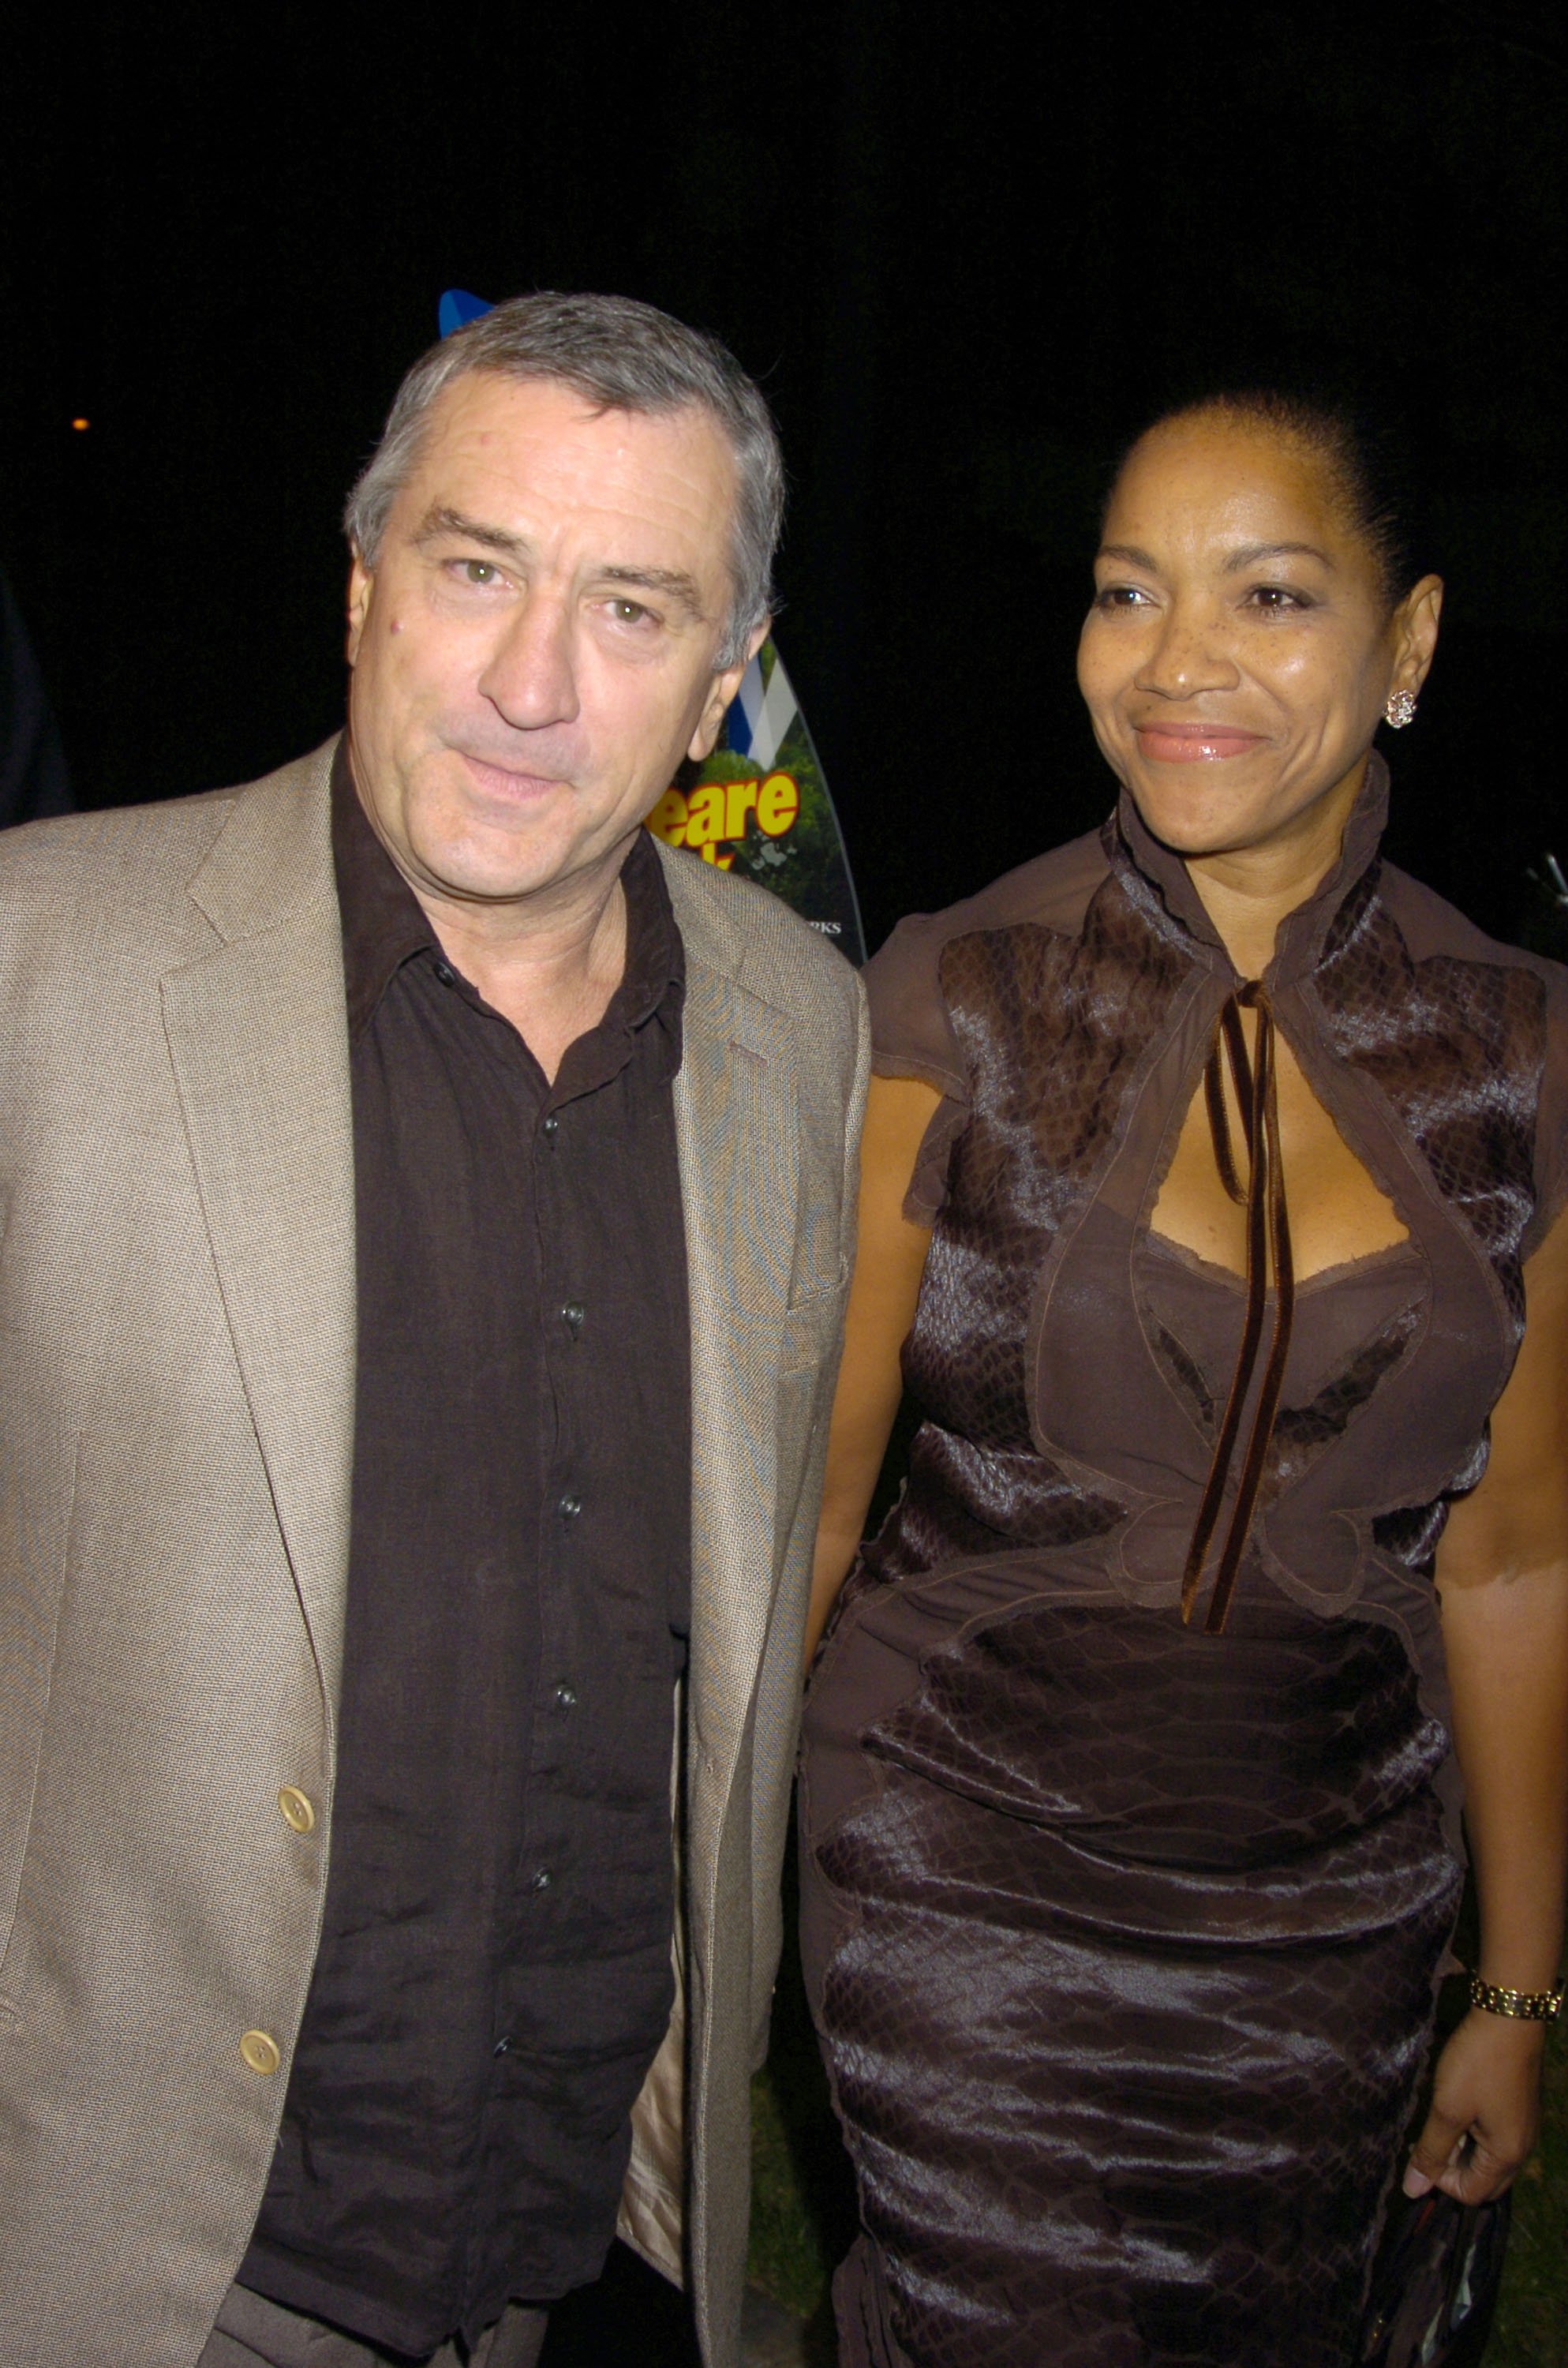 Robert De Niro and wife Grace Hightower during "Shark Tale" New York premiere at The Delacorte Theatre in Central Park in New York, New York. / Source: Getty Images